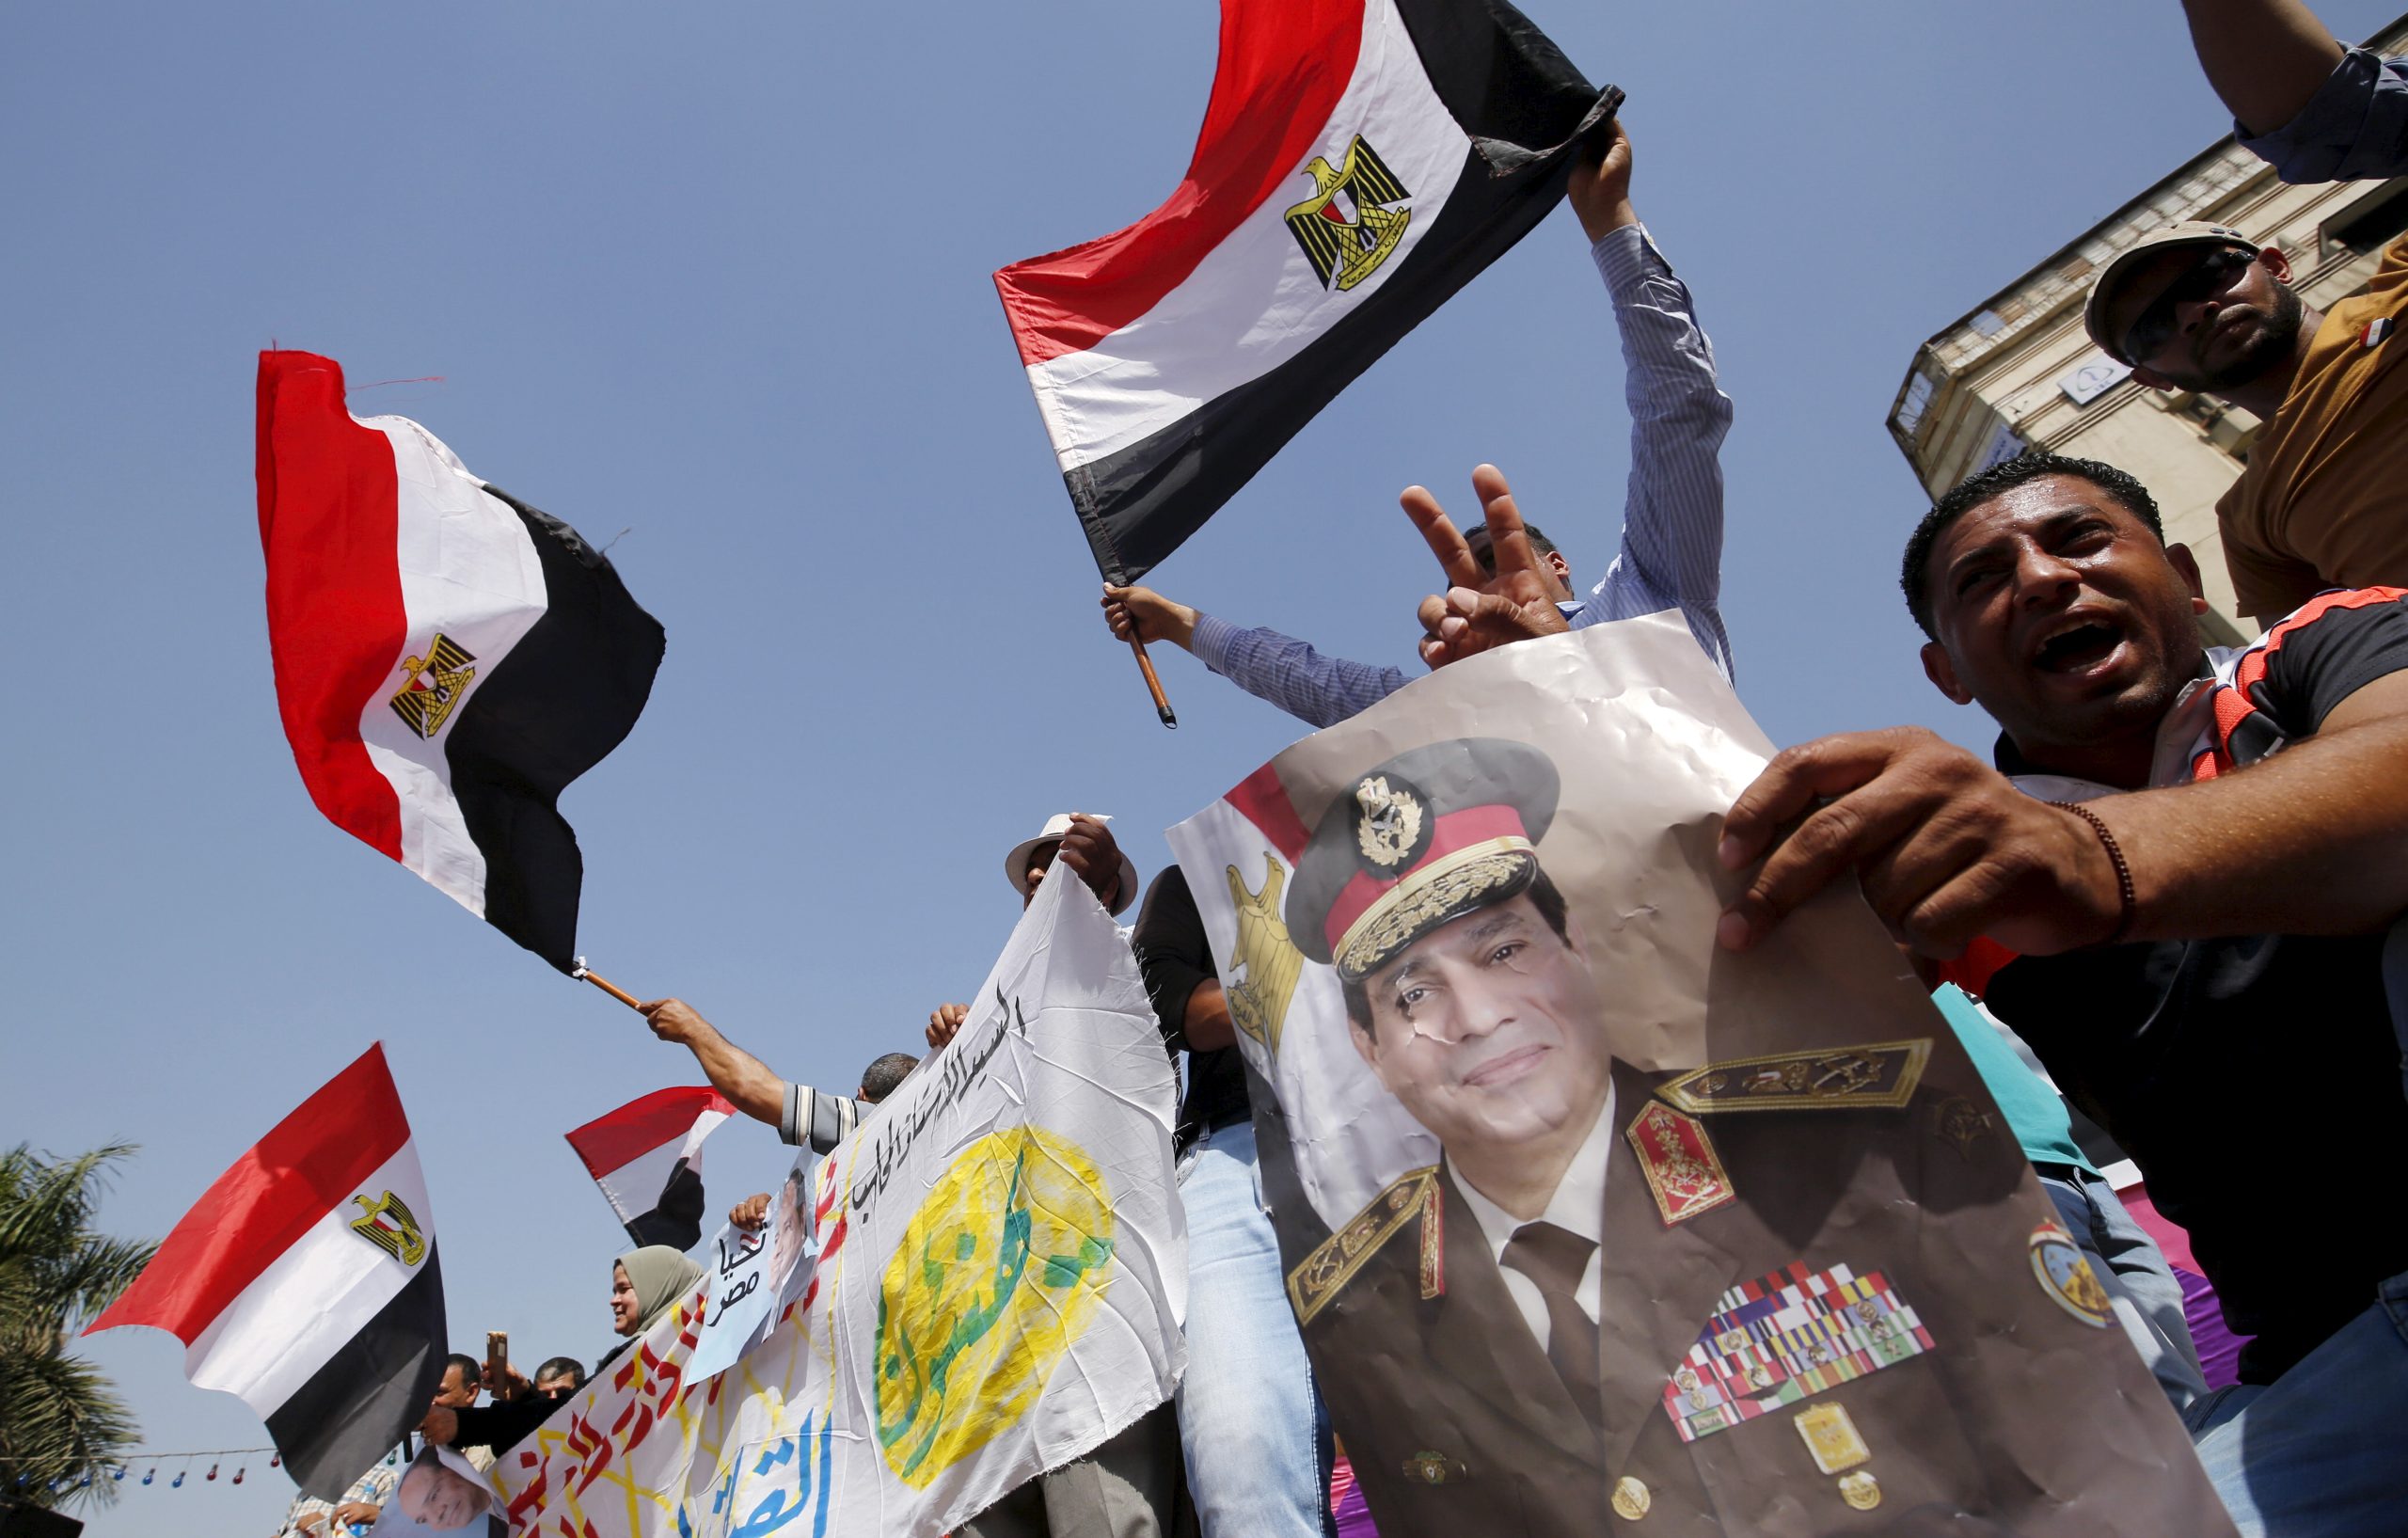 Egyptian Twitter network amplifies pro-government hashtags, attacks fact-checkers